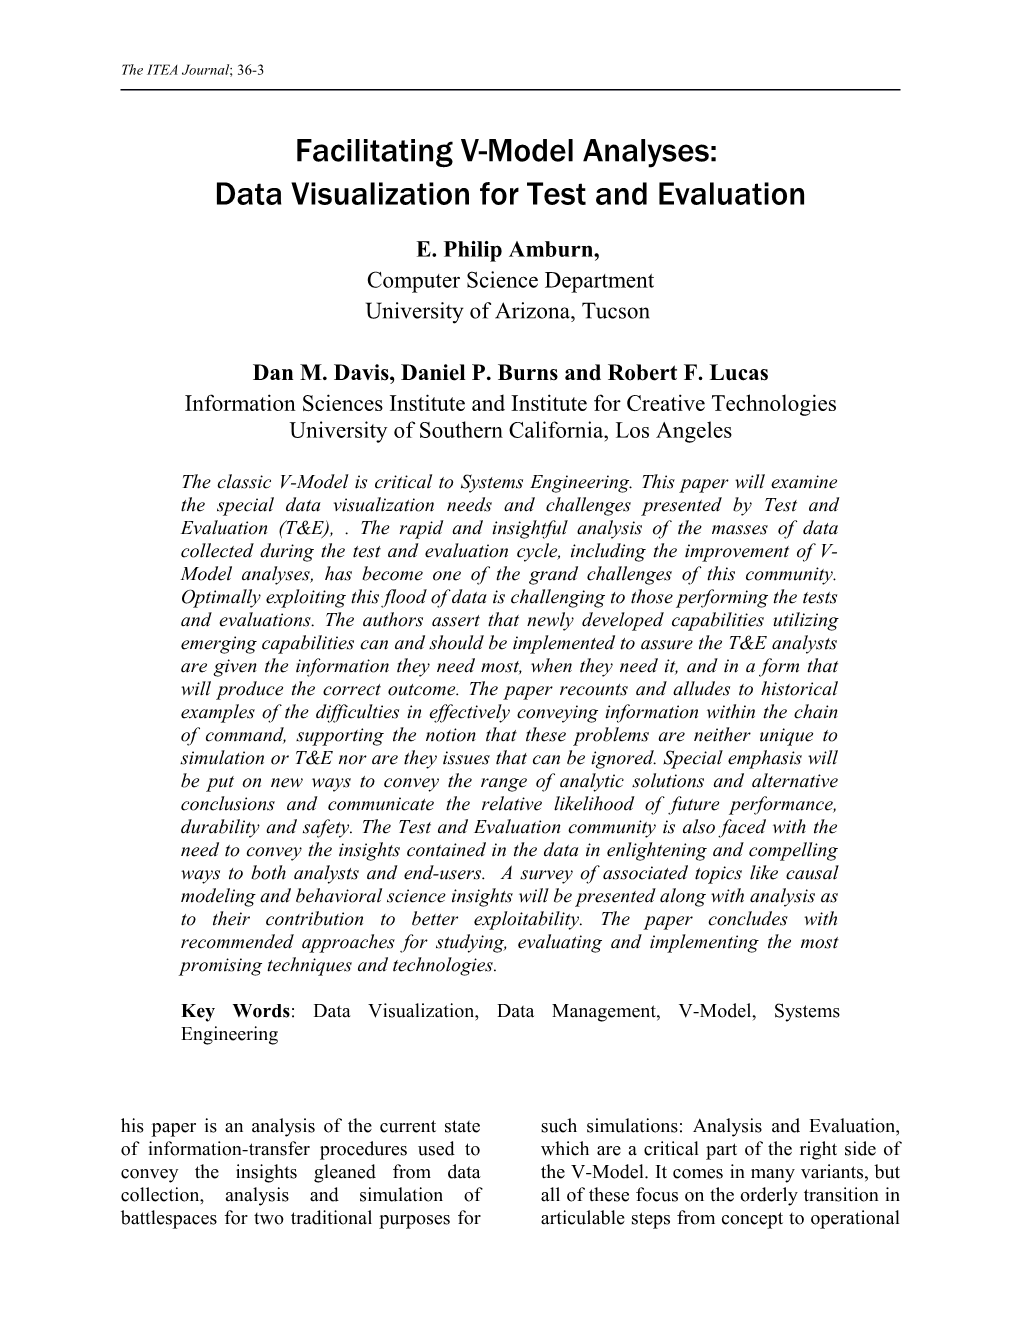 V-Model Analyses: Data Visualization for Test and Evaluation